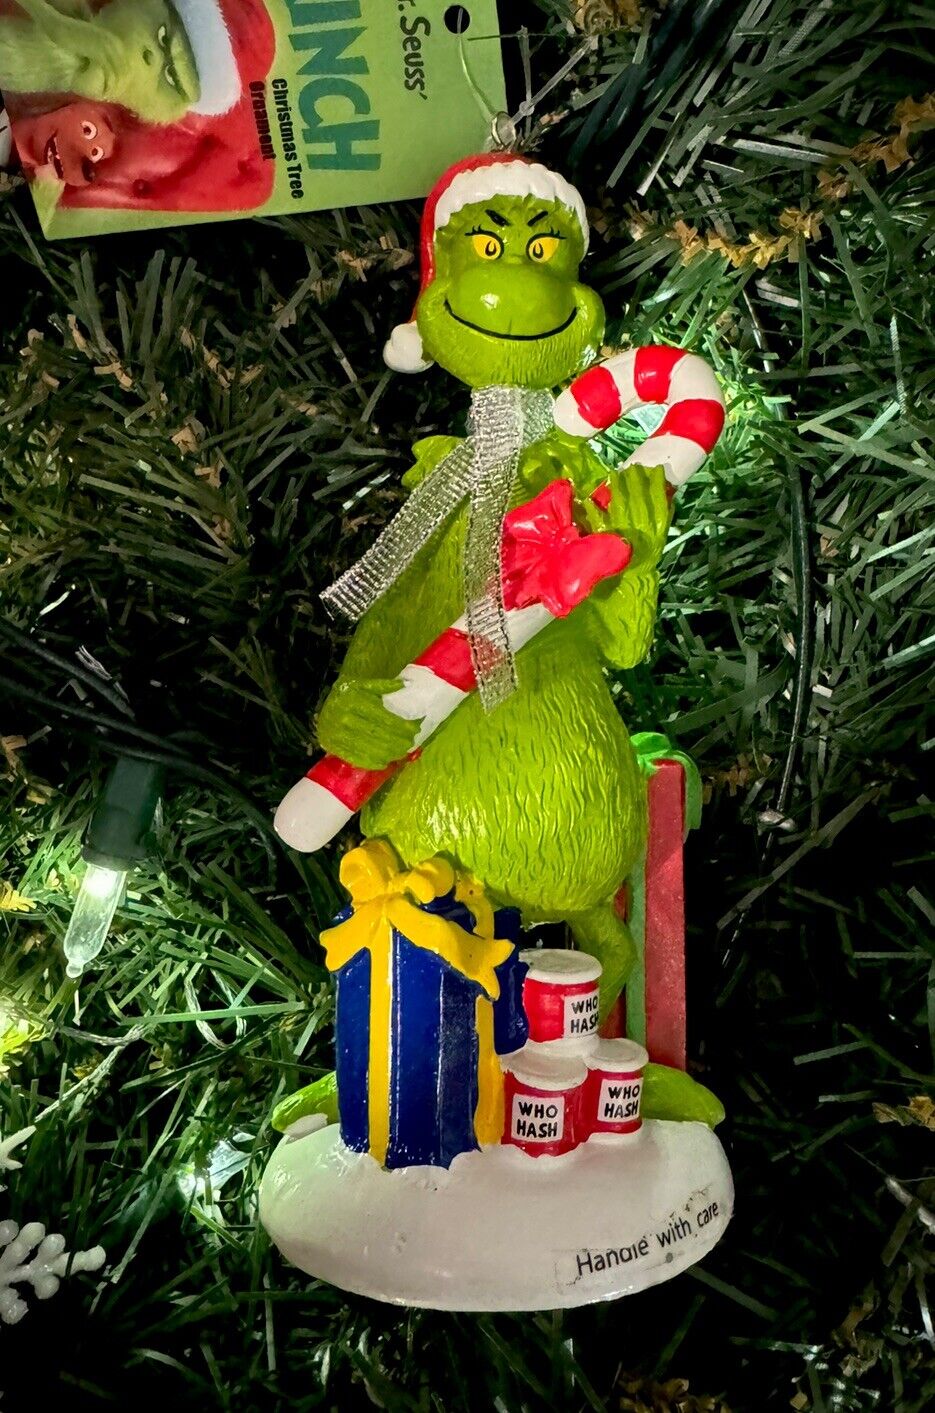 2023 Grinch Santa (LARGE) w Who Hash How The Grinch Stole Christmas Ornament NEW